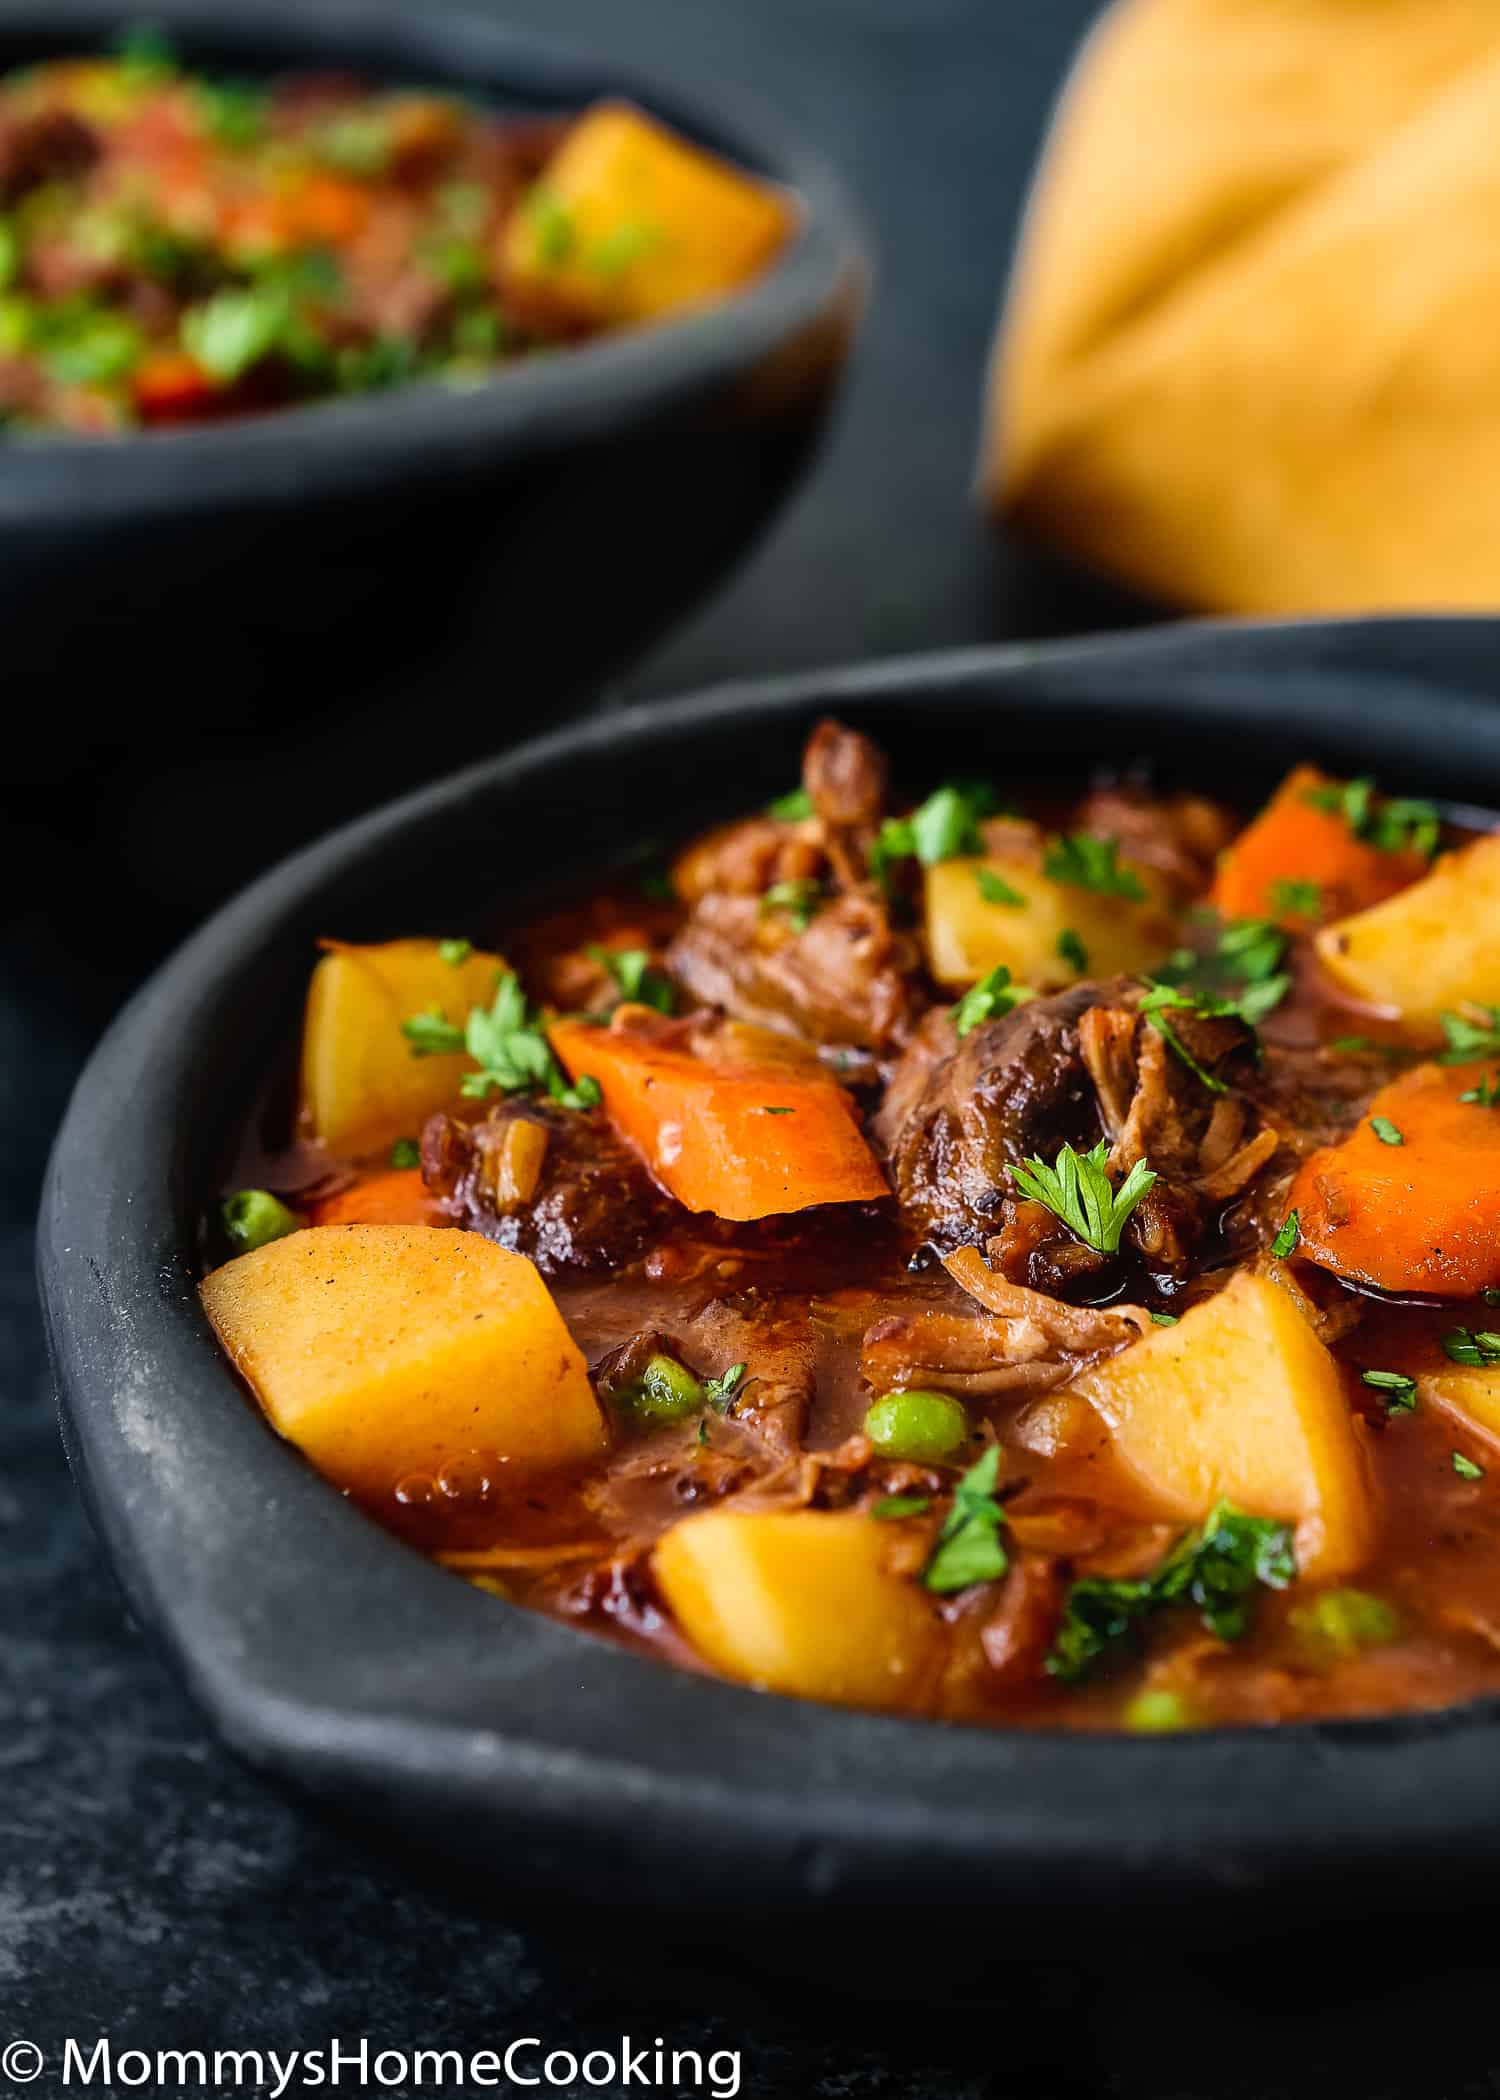 Slow Cooker Oxtail Stew [Video] - Mommy's Home Cooking